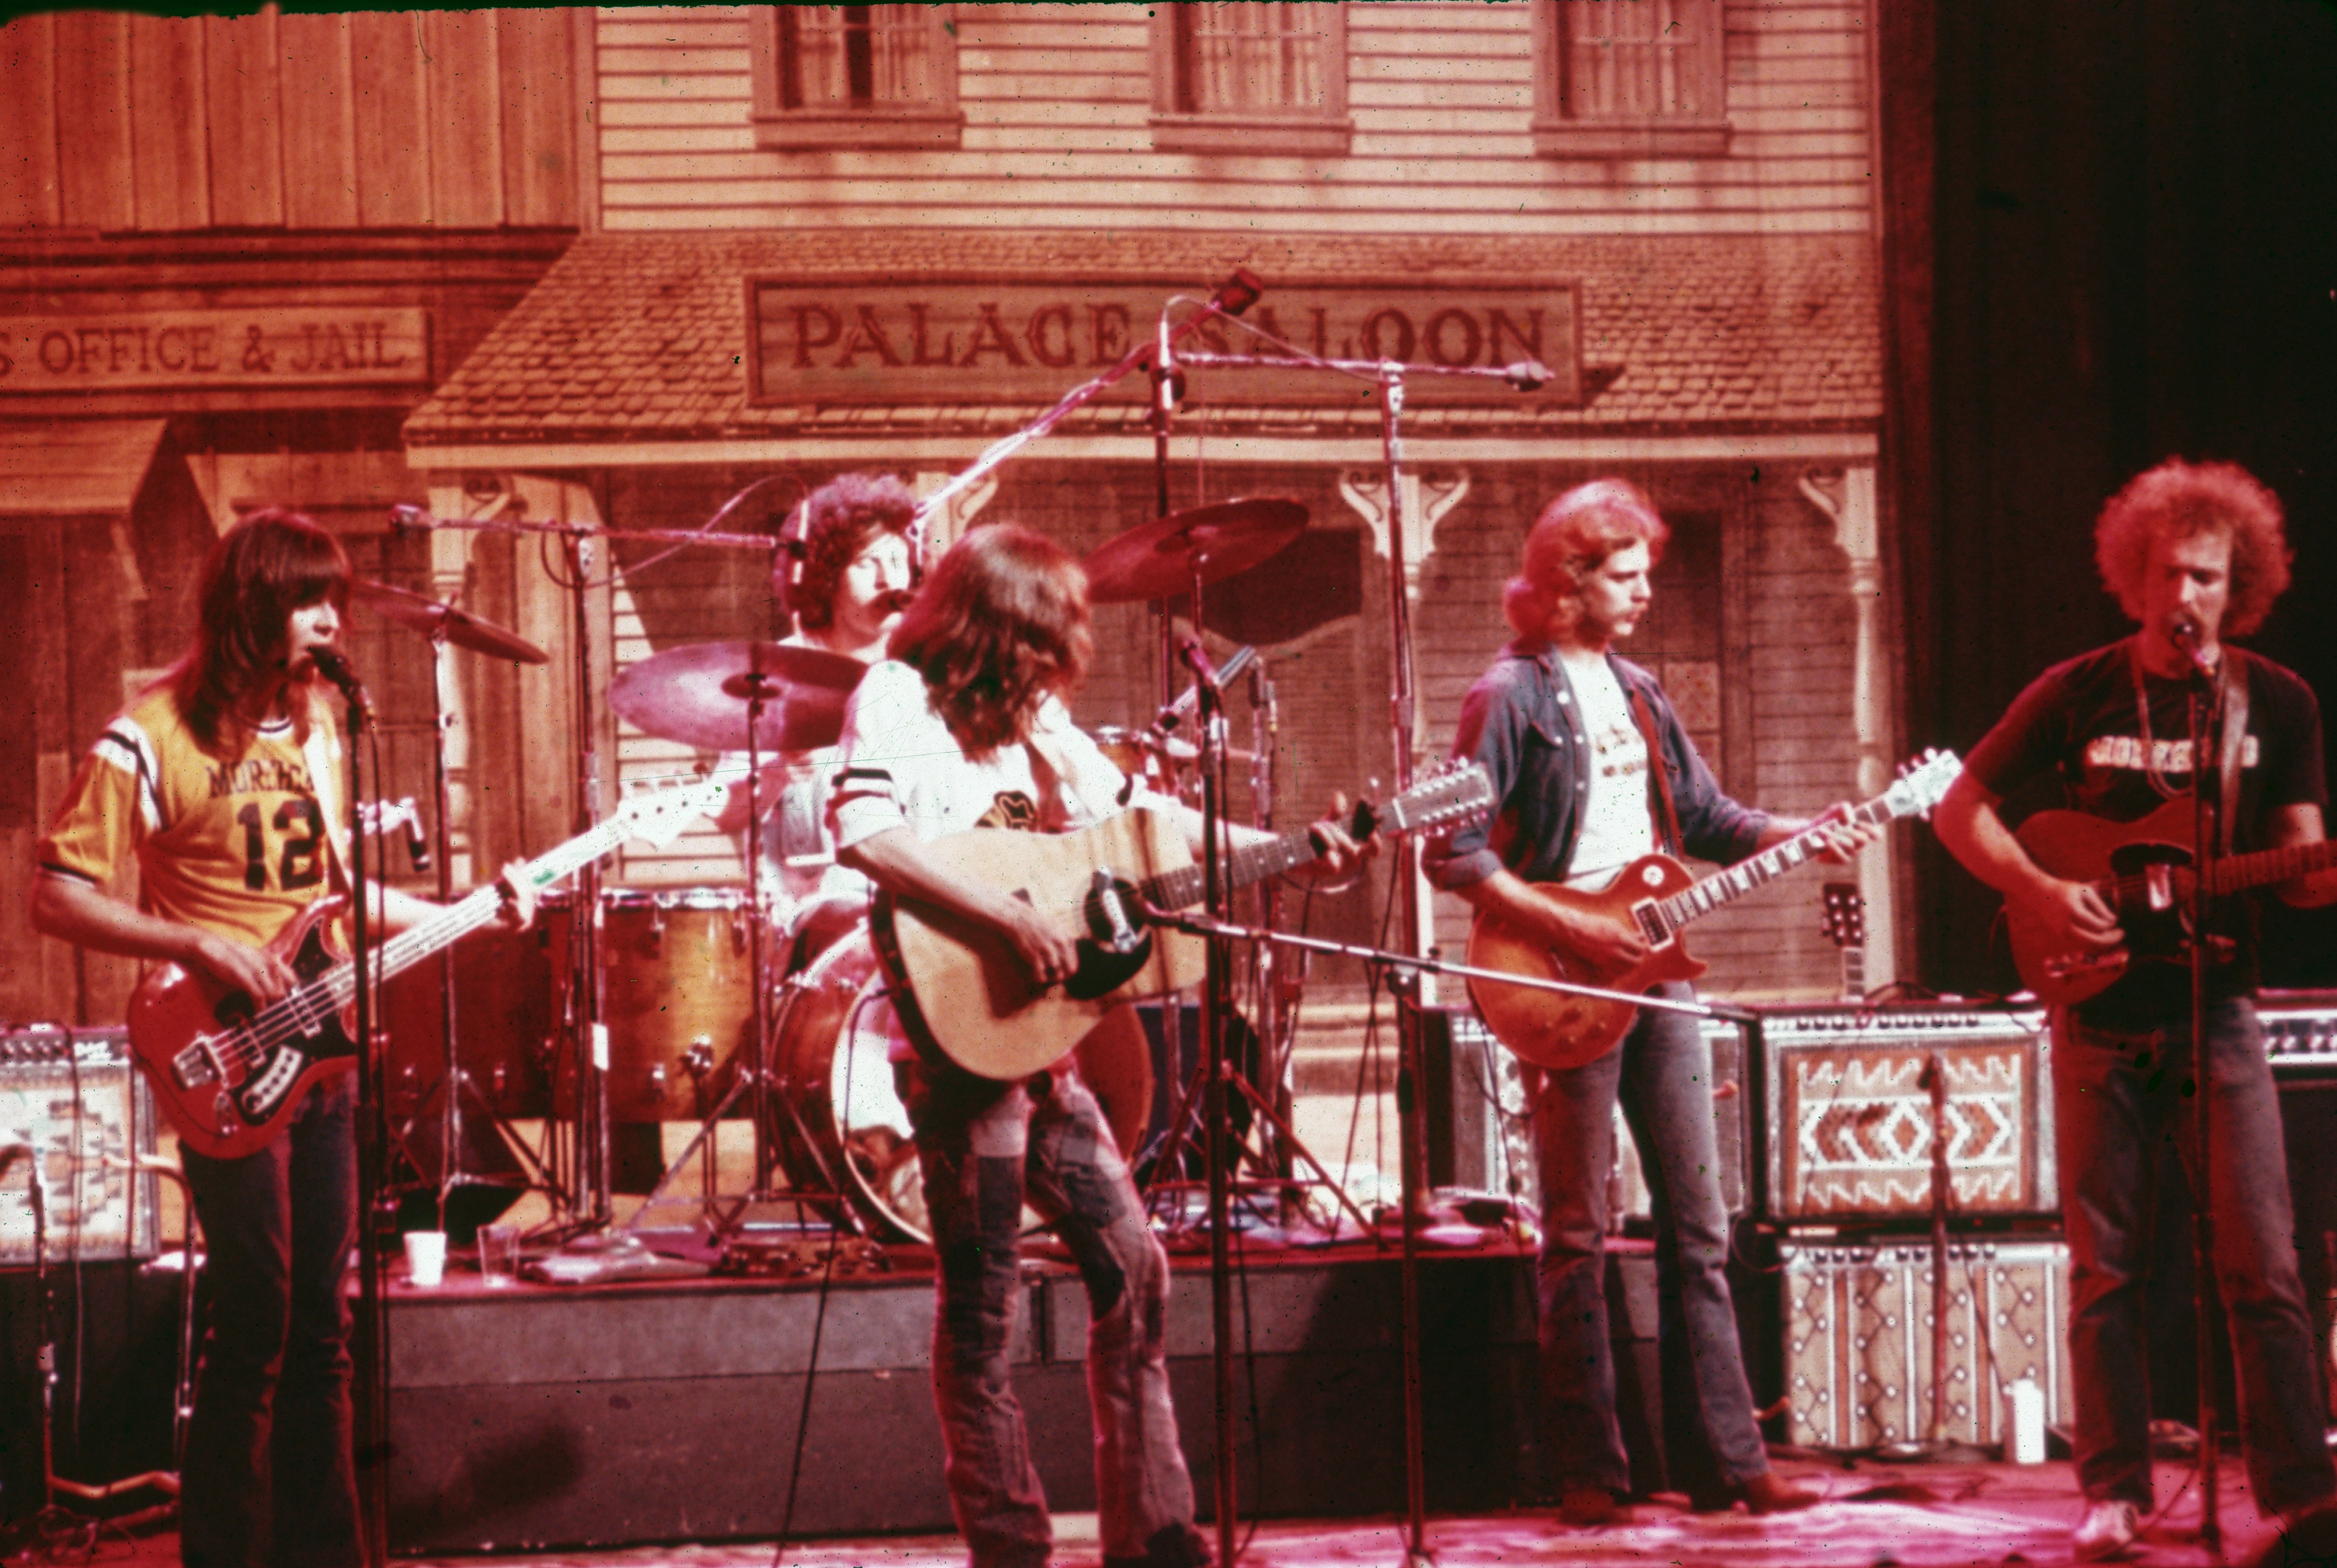 5. The Eagles